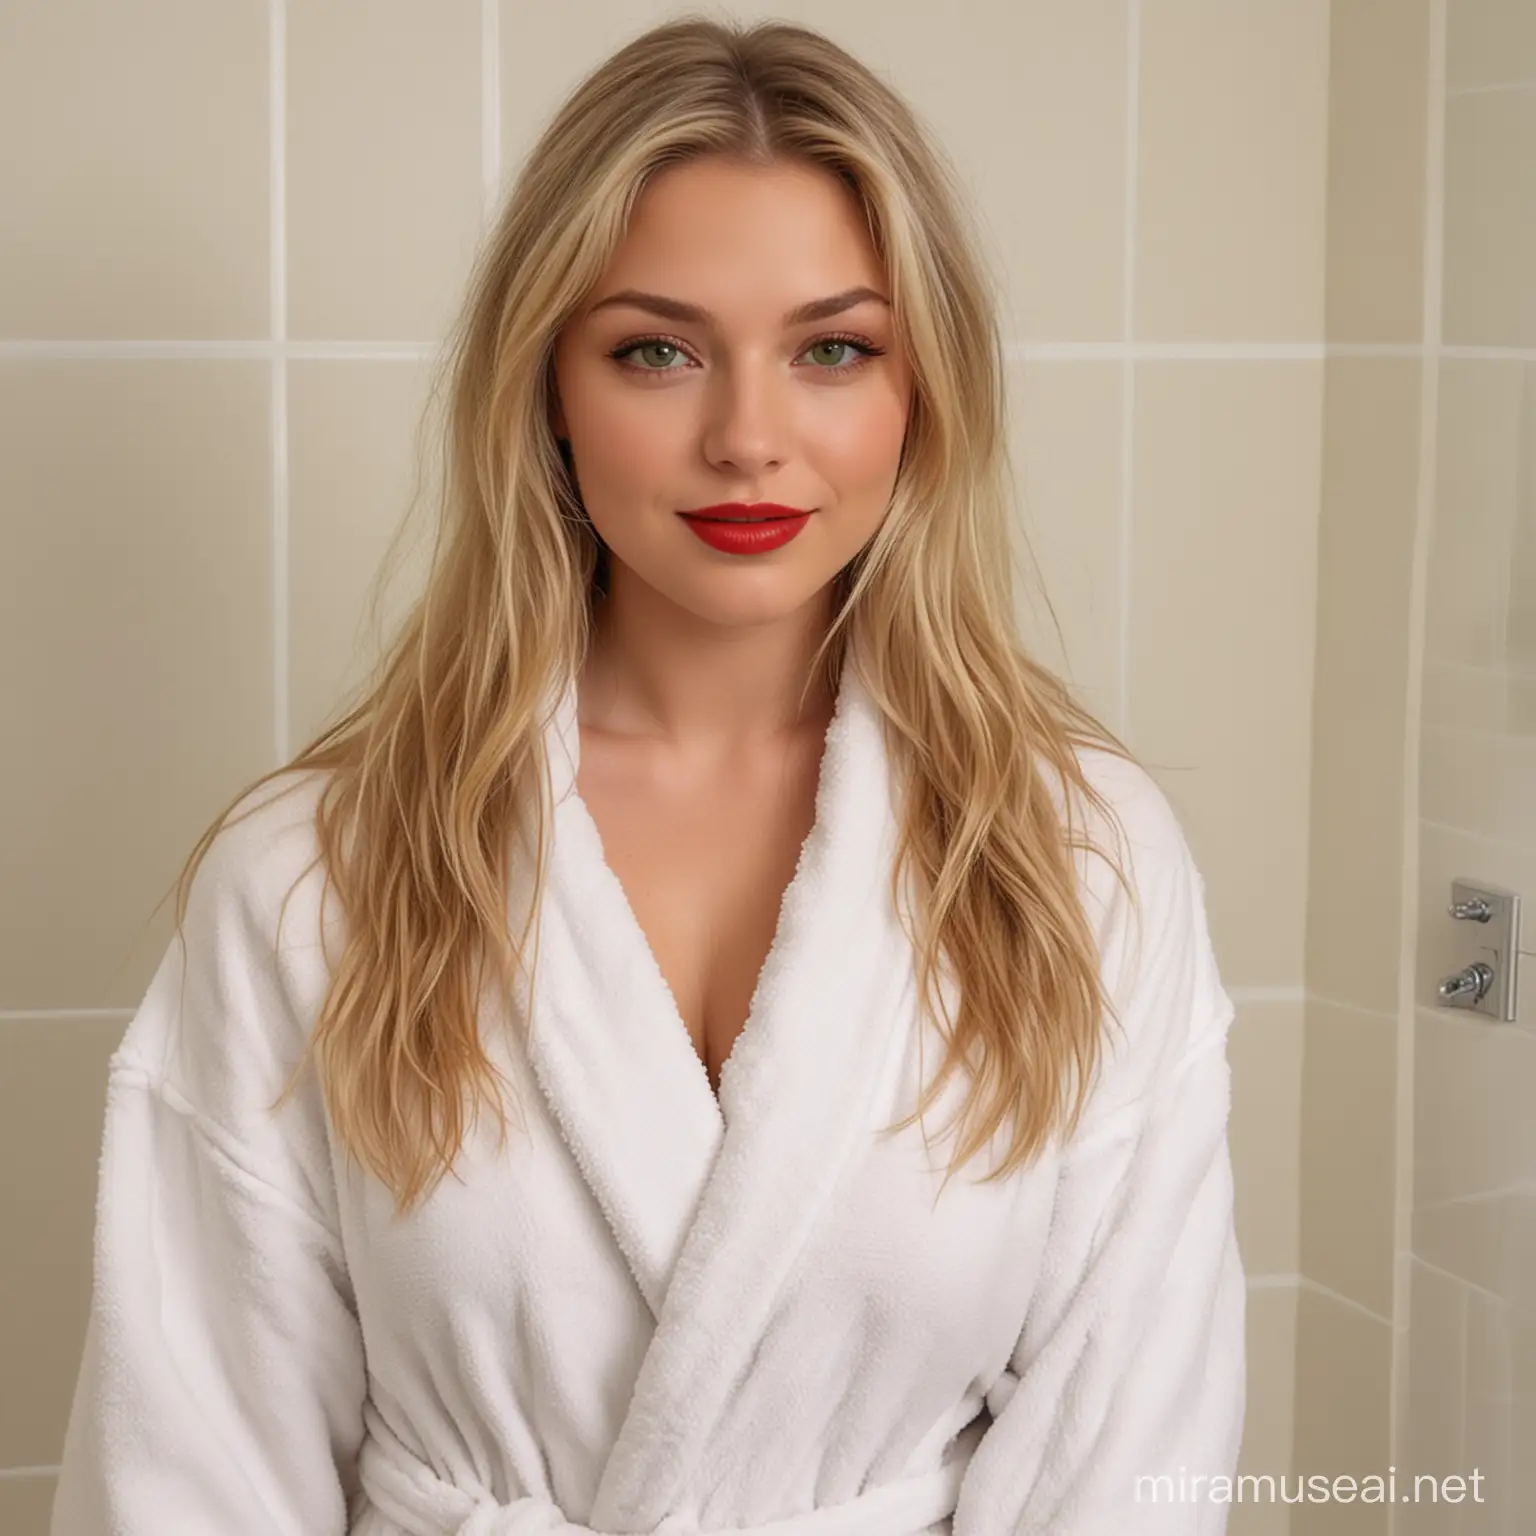 Attractive Blonde Female Student Poses Nude with Fluffy Bathrobe in Bathroom